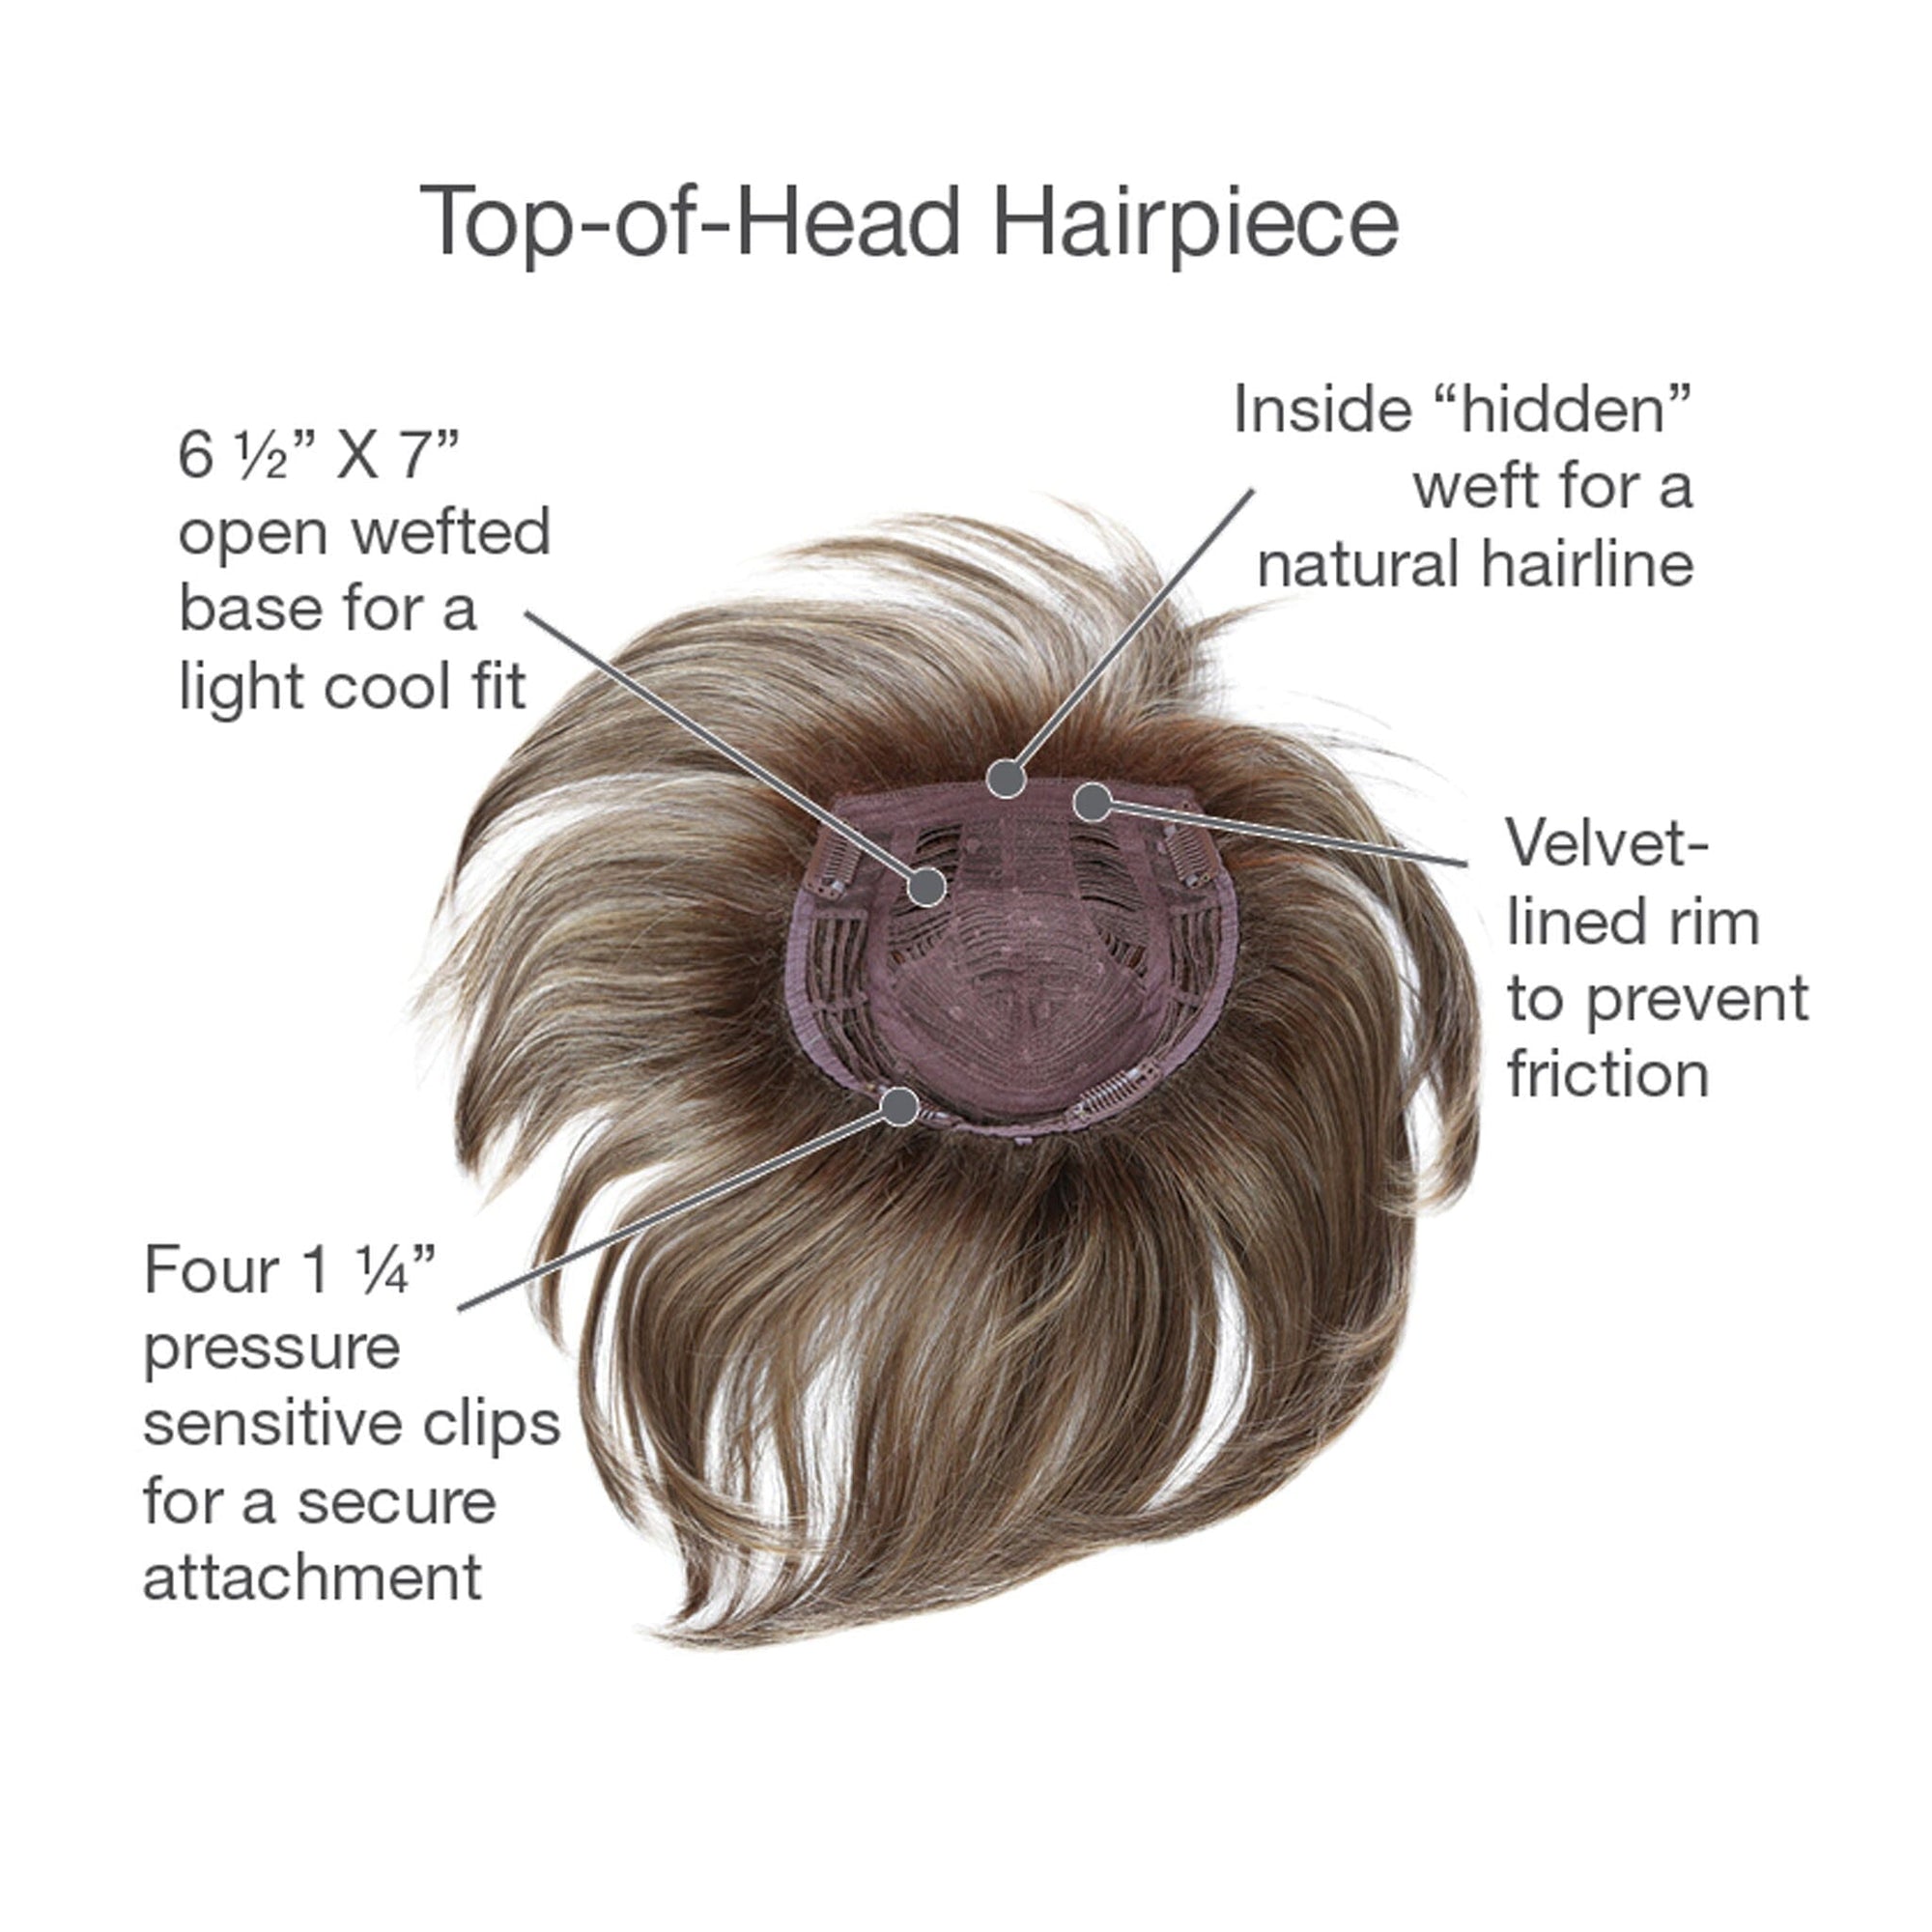 Top-of-Head Hairpiece